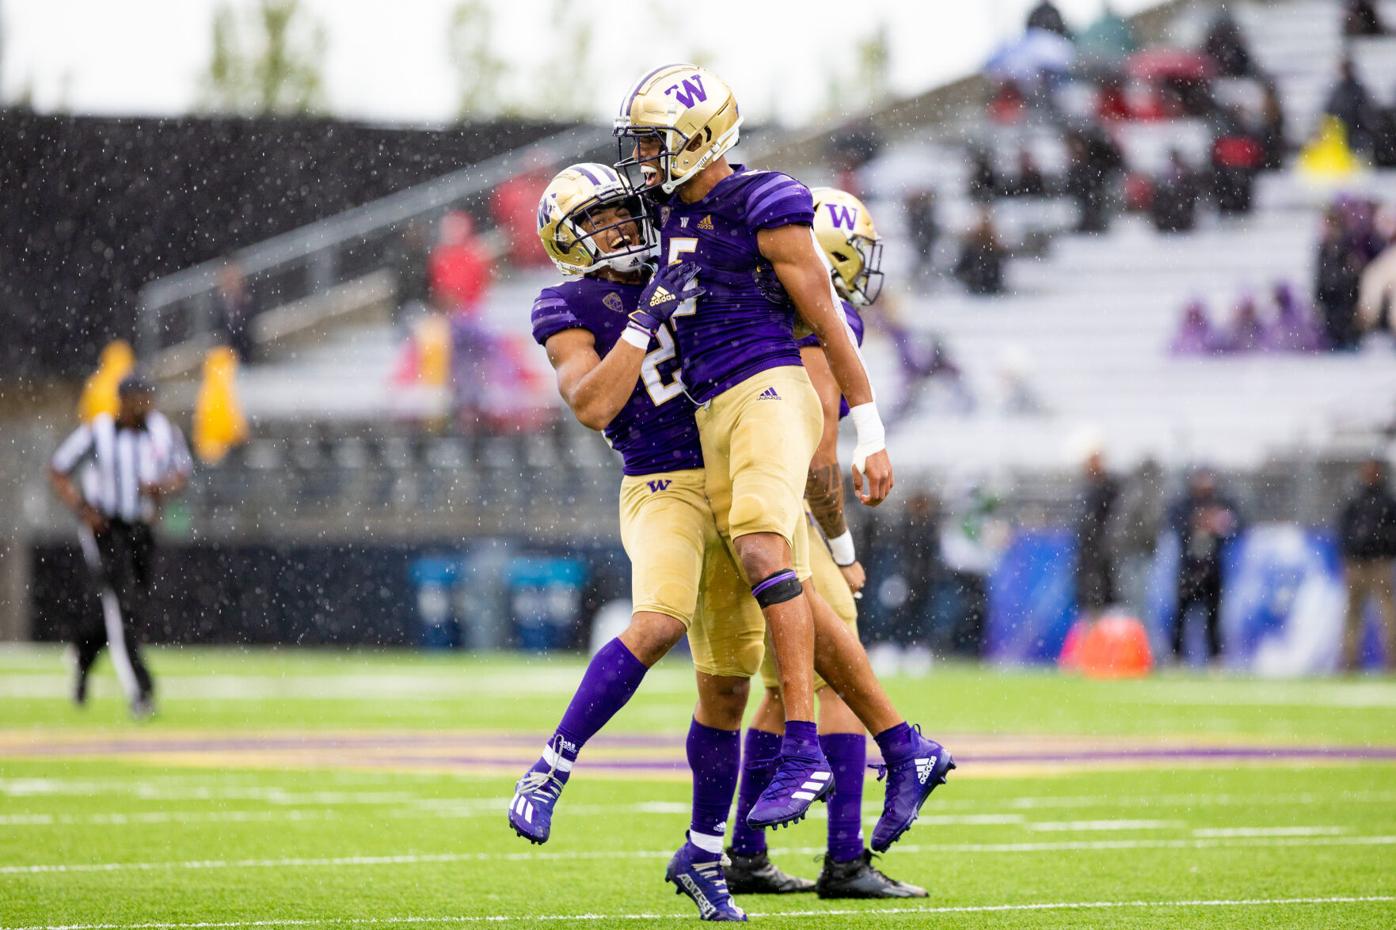 Family time: Trent McDuffie finds a home away from home with UW football